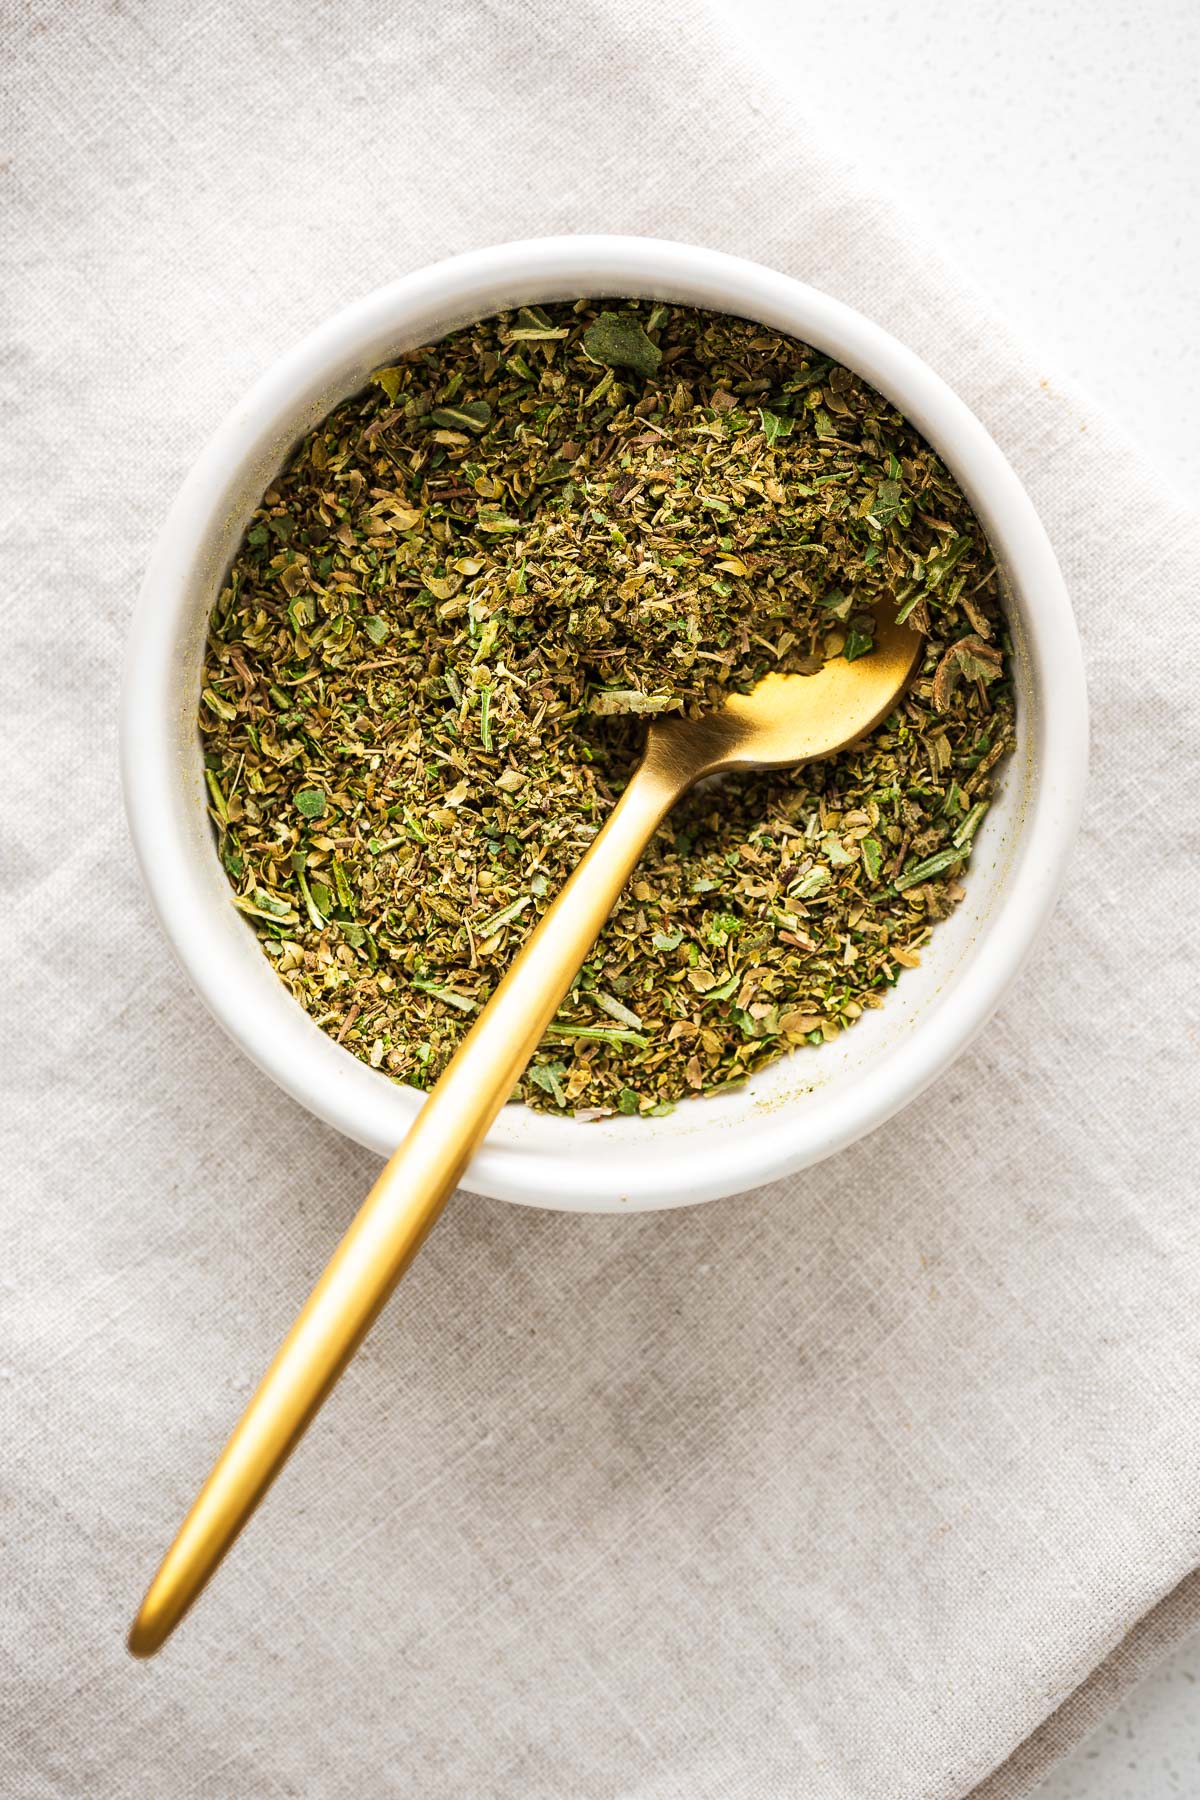 Homemade Italian seasoning in a white bowl with golden teaspoon viewed from above.